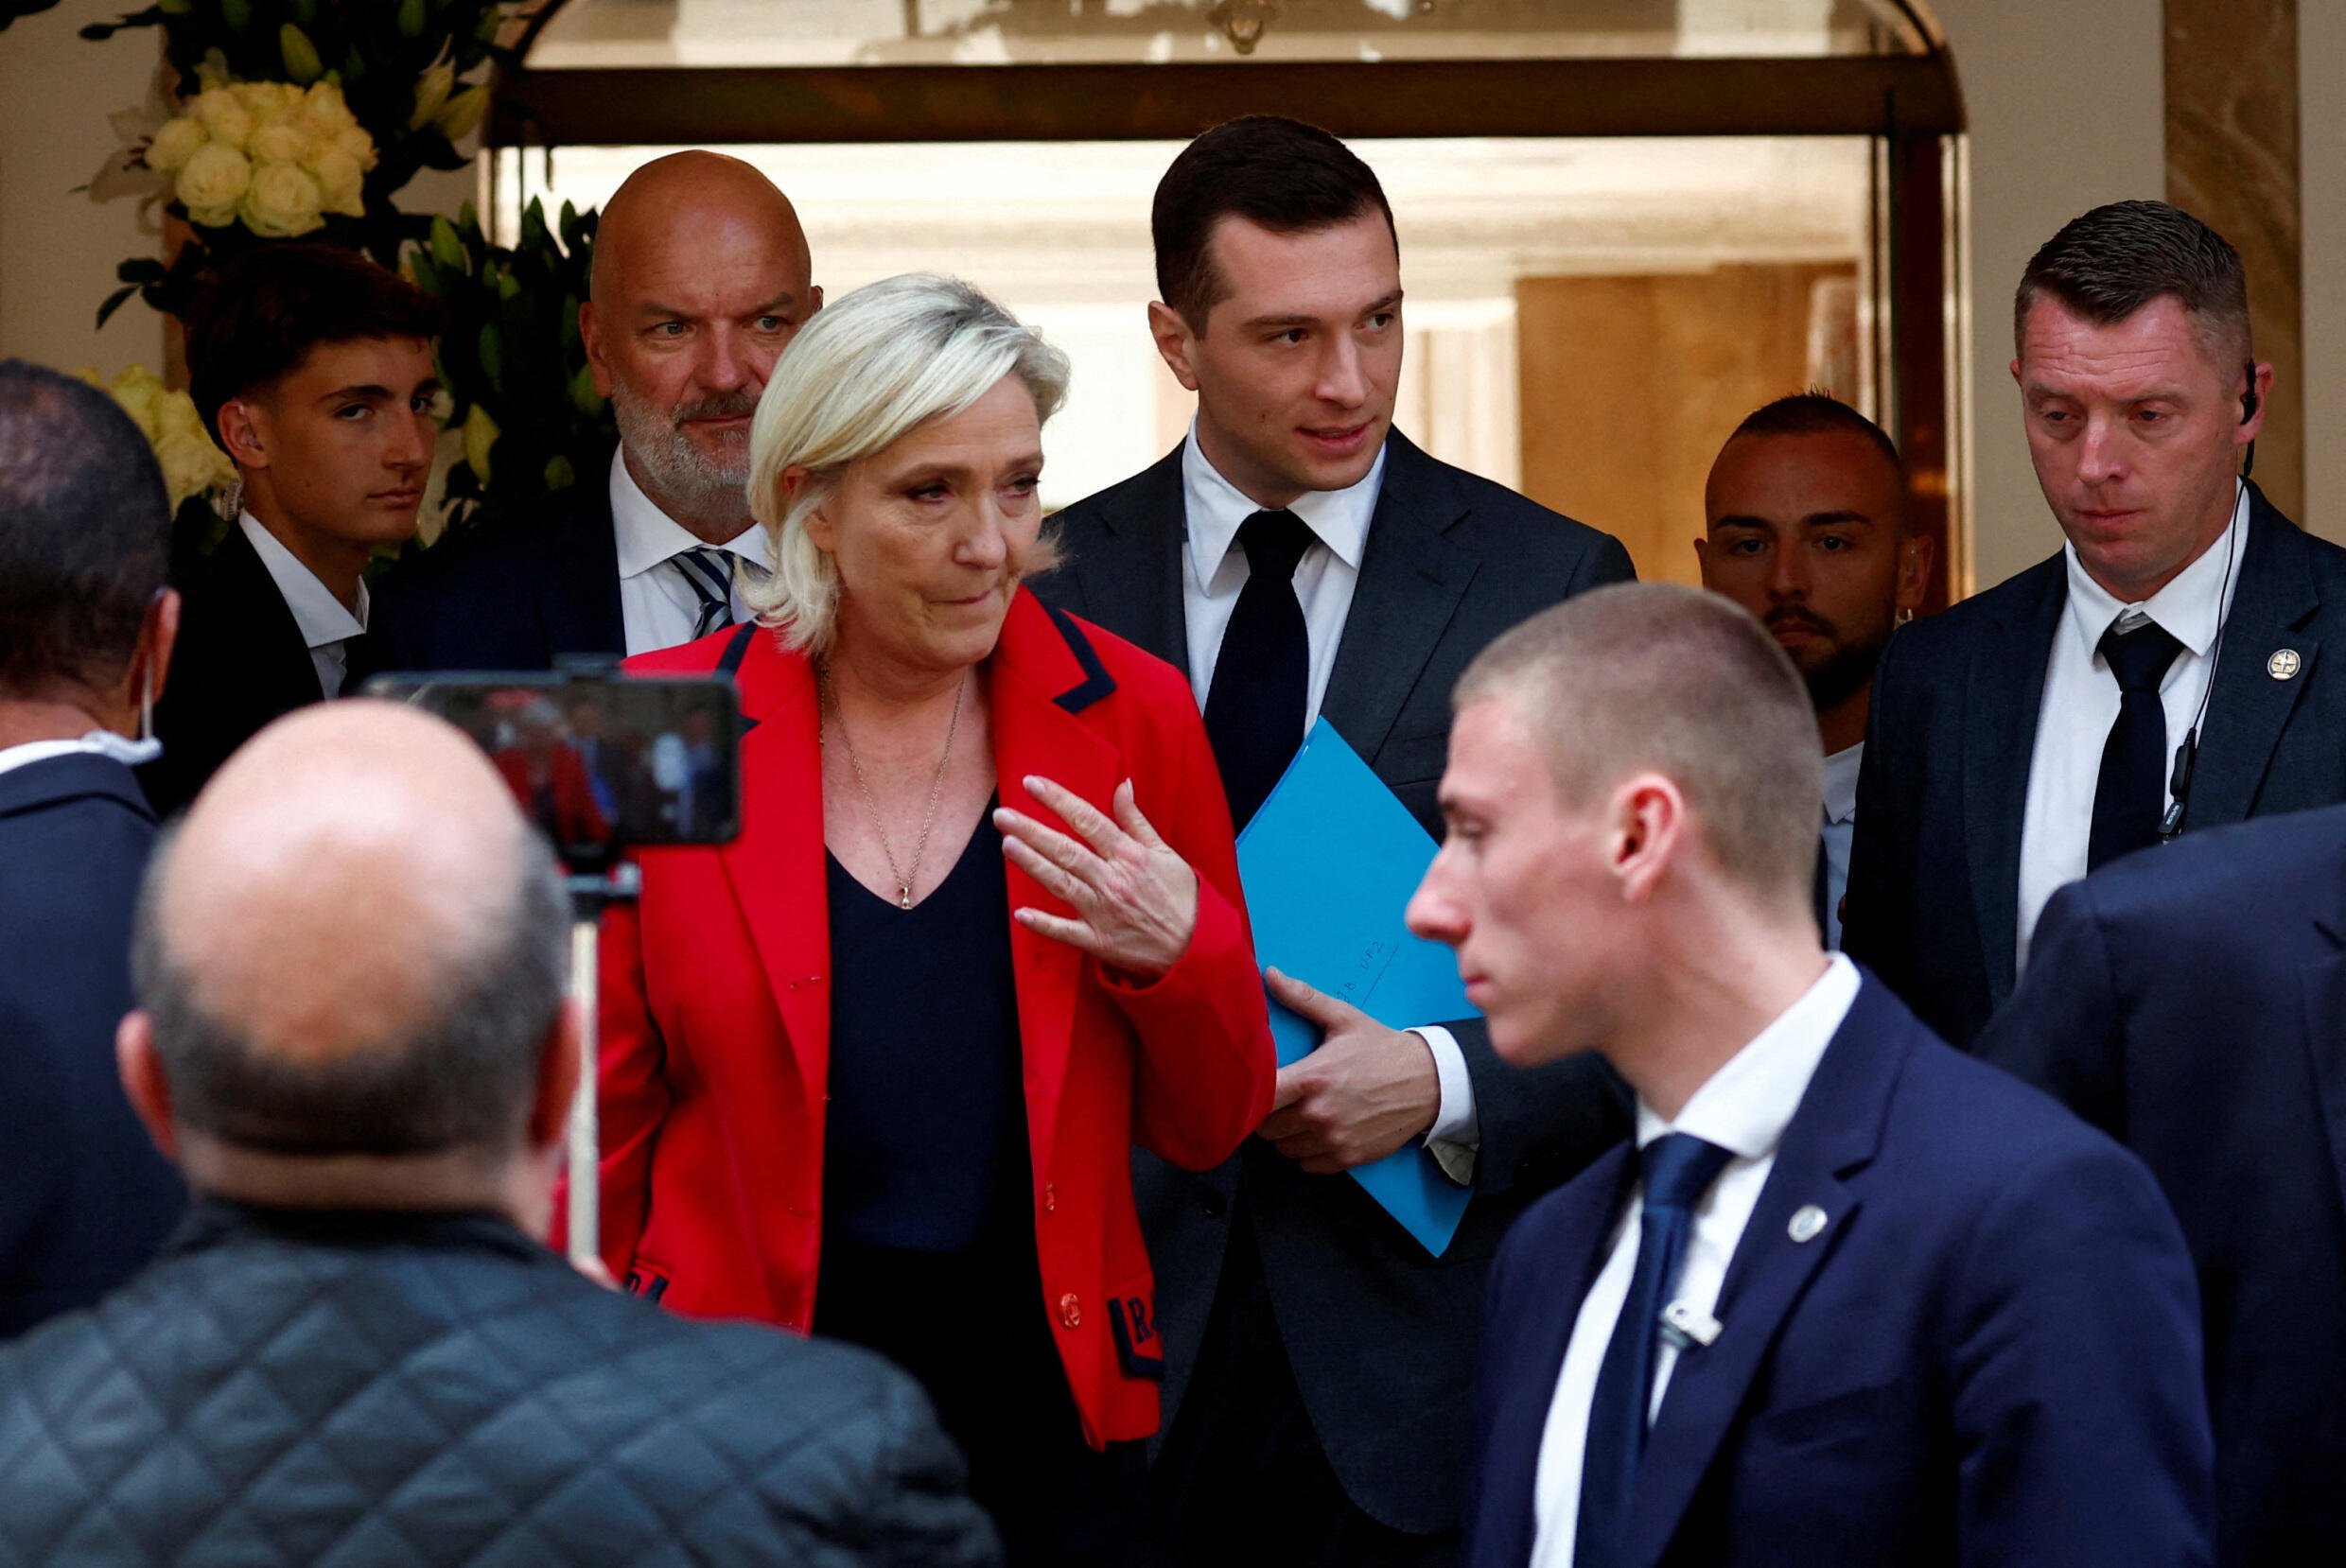 Far-right leader Le Pen questions French president's role as army chief